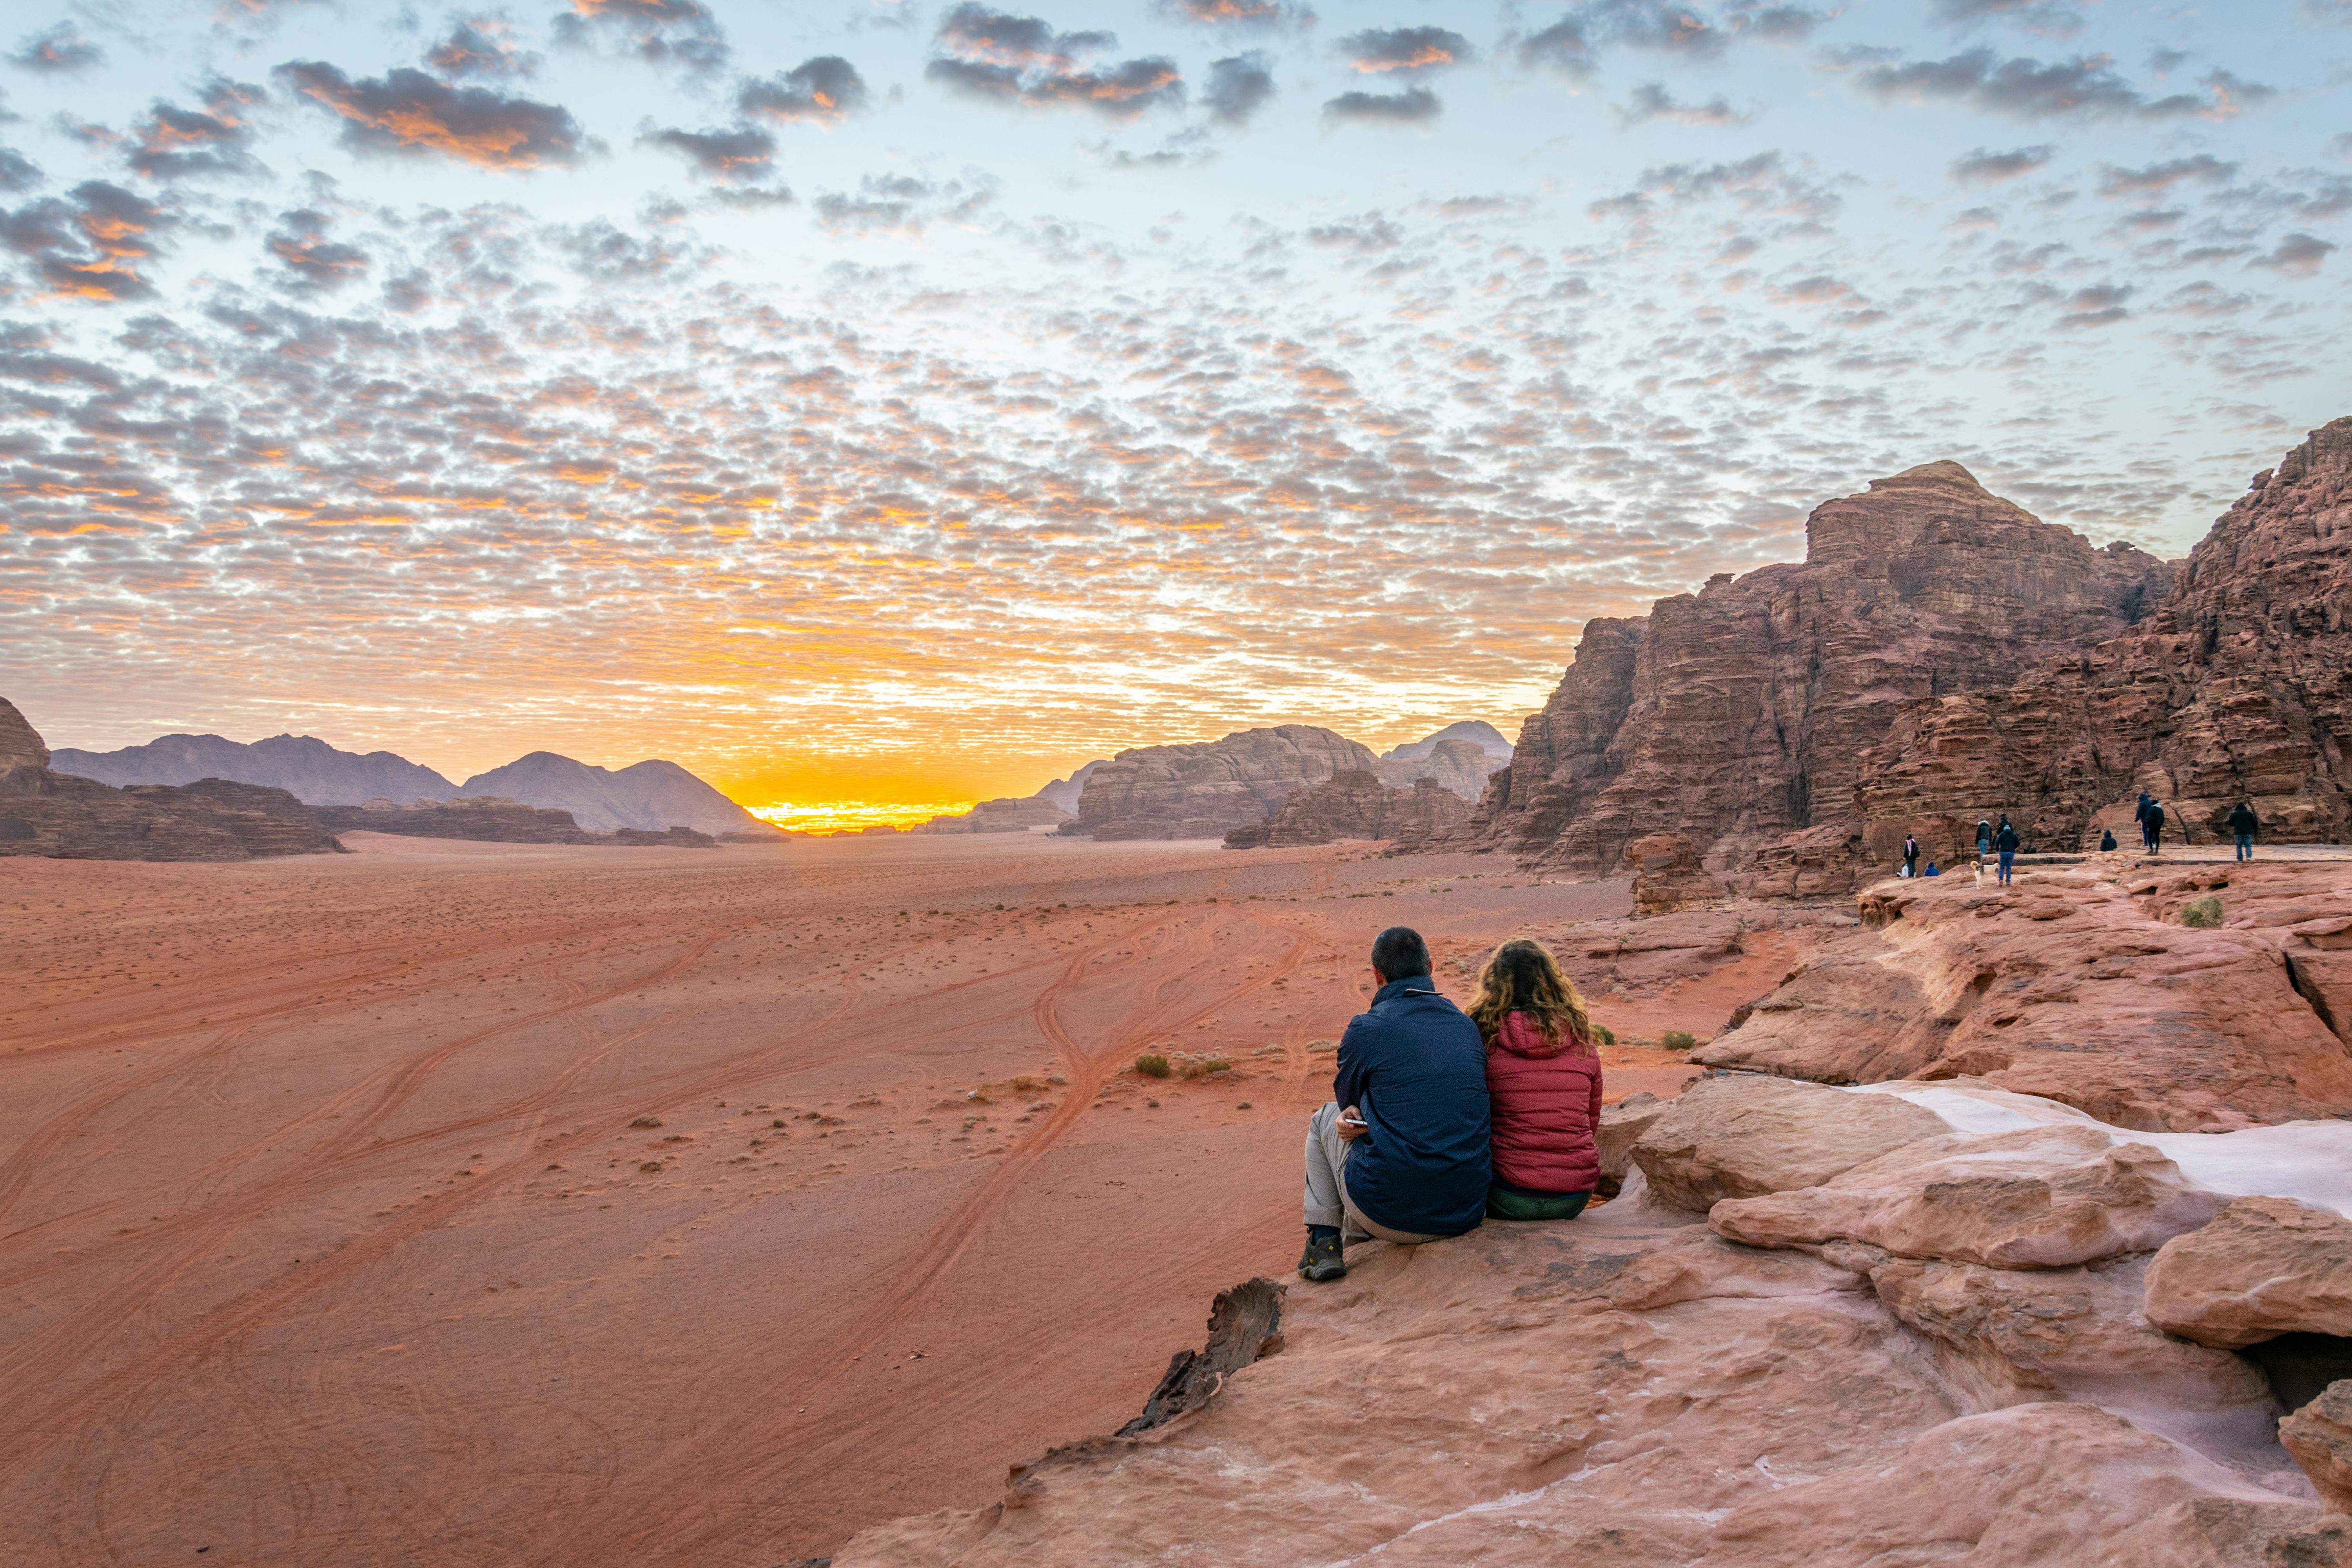 Private tour of Wadi Rum from Aqaba